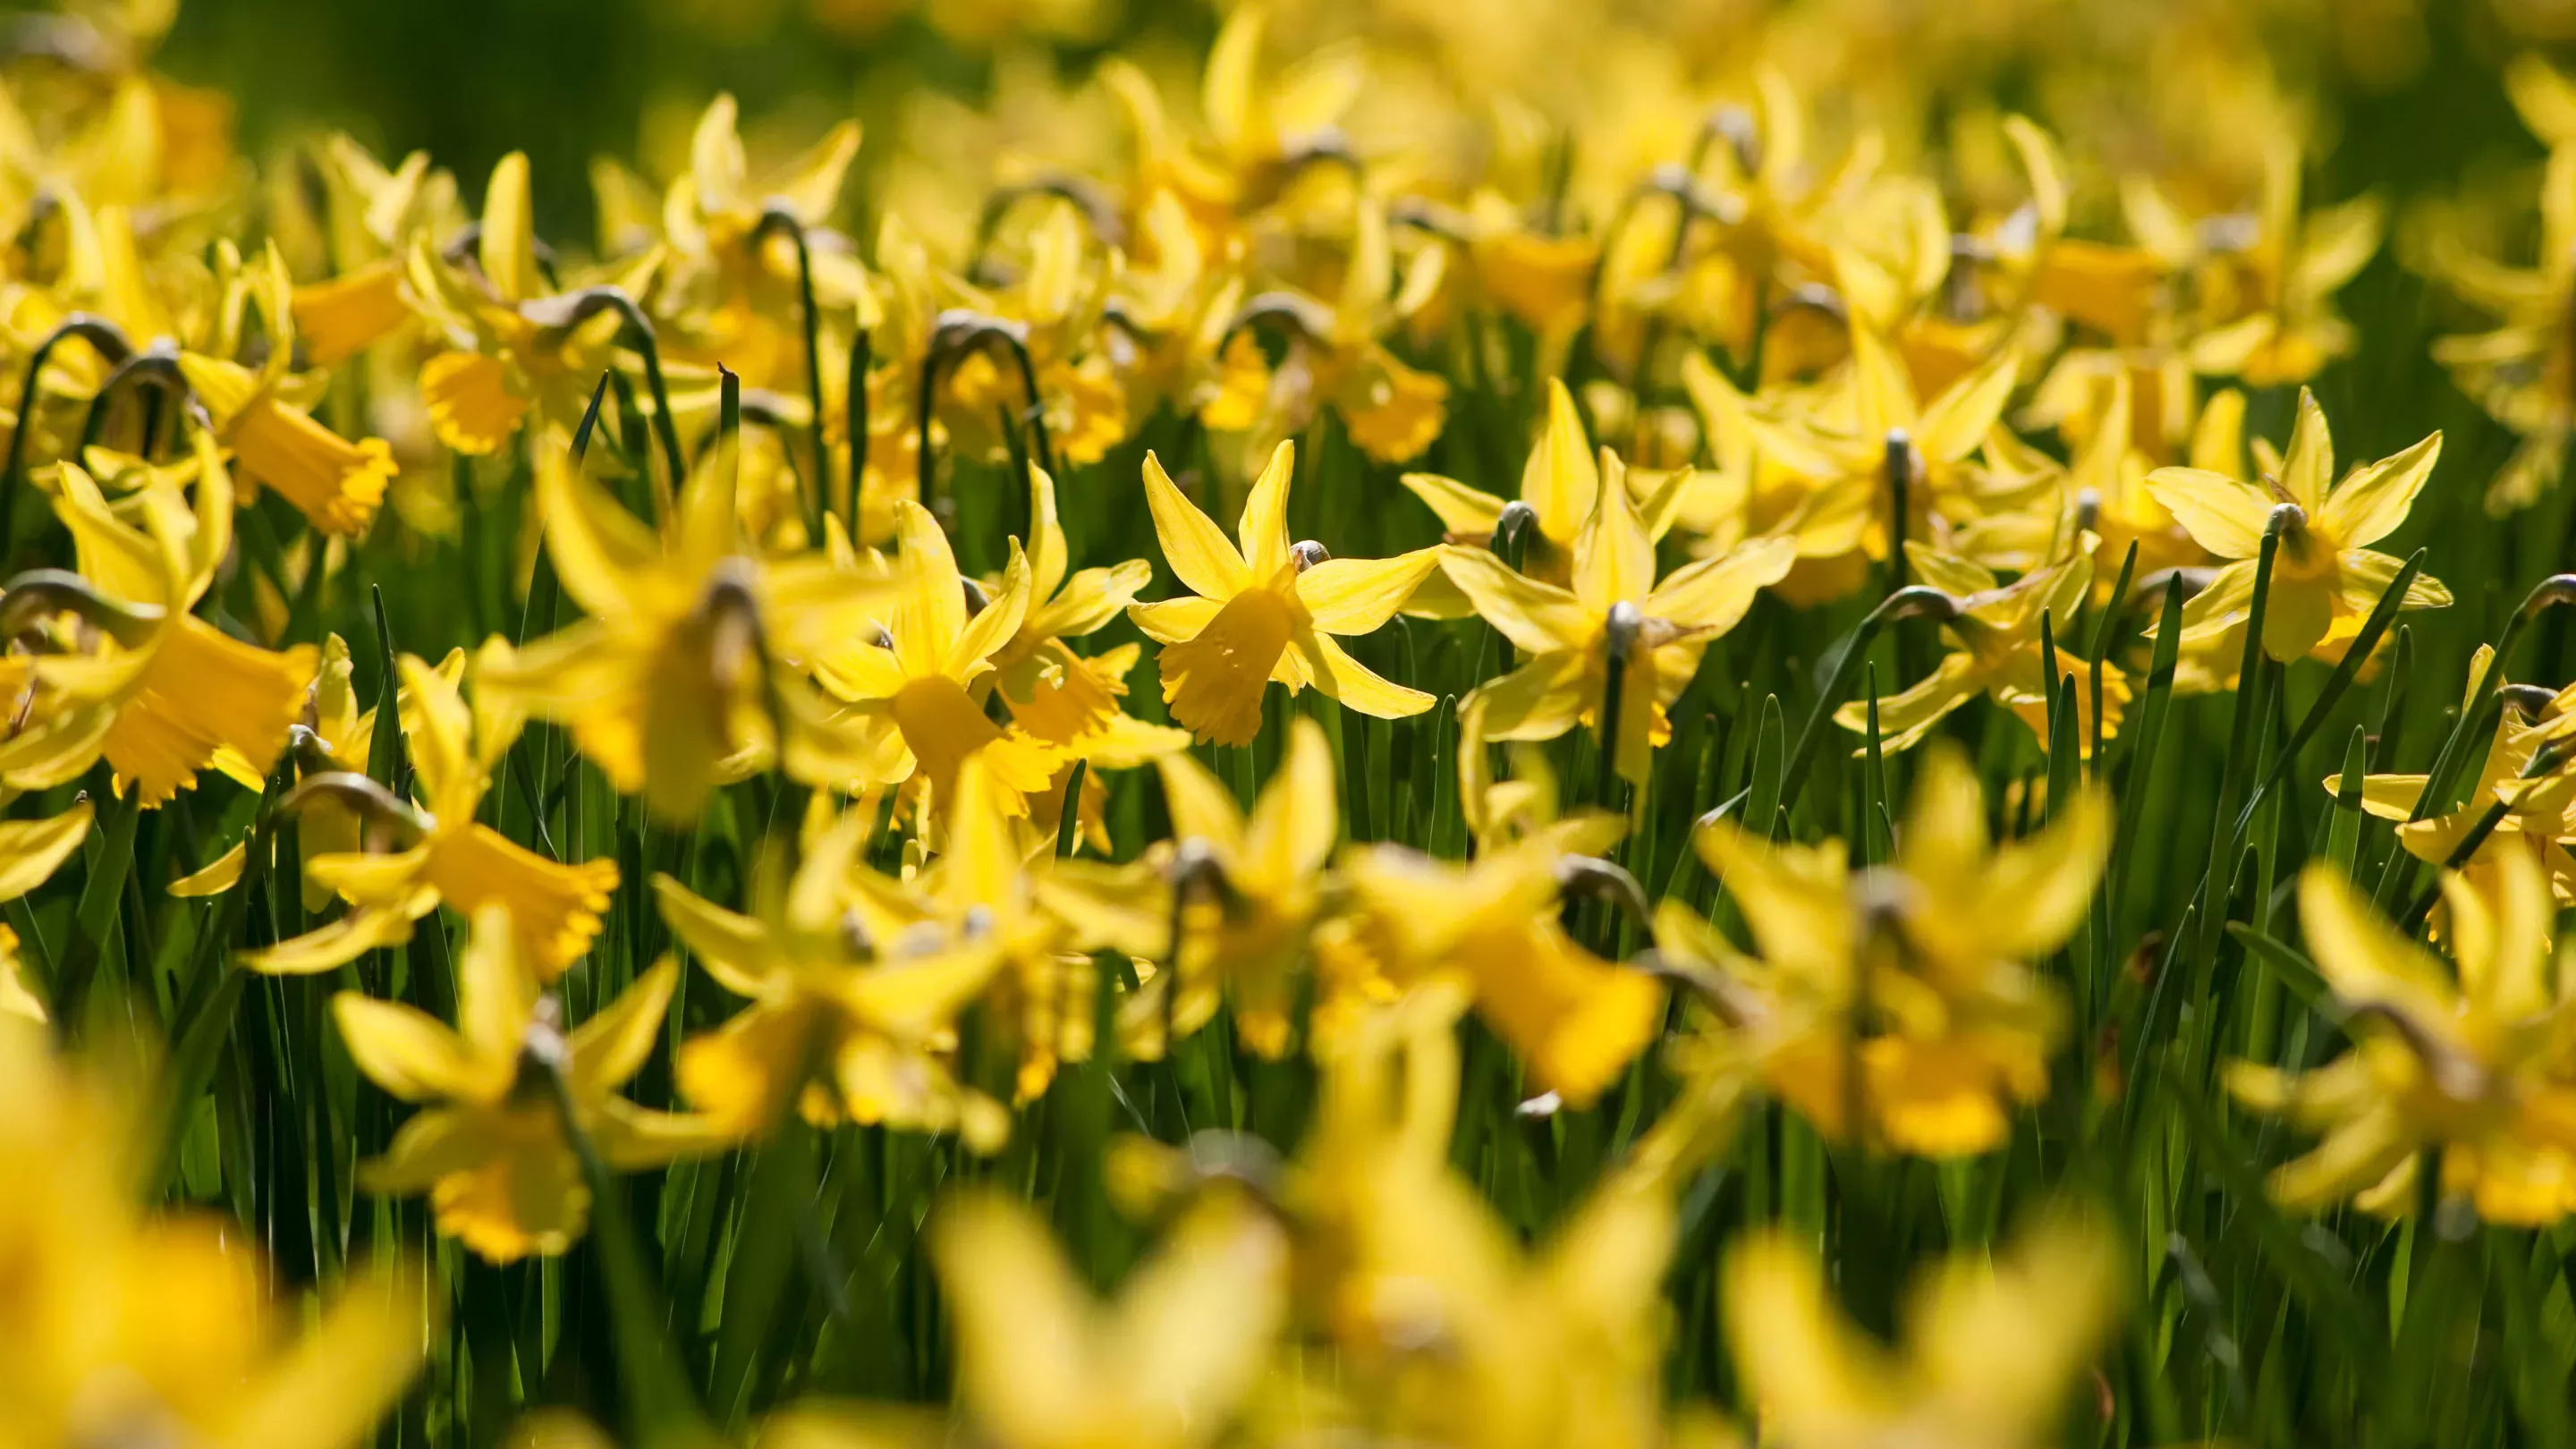 Daffodils in spring at Kew 